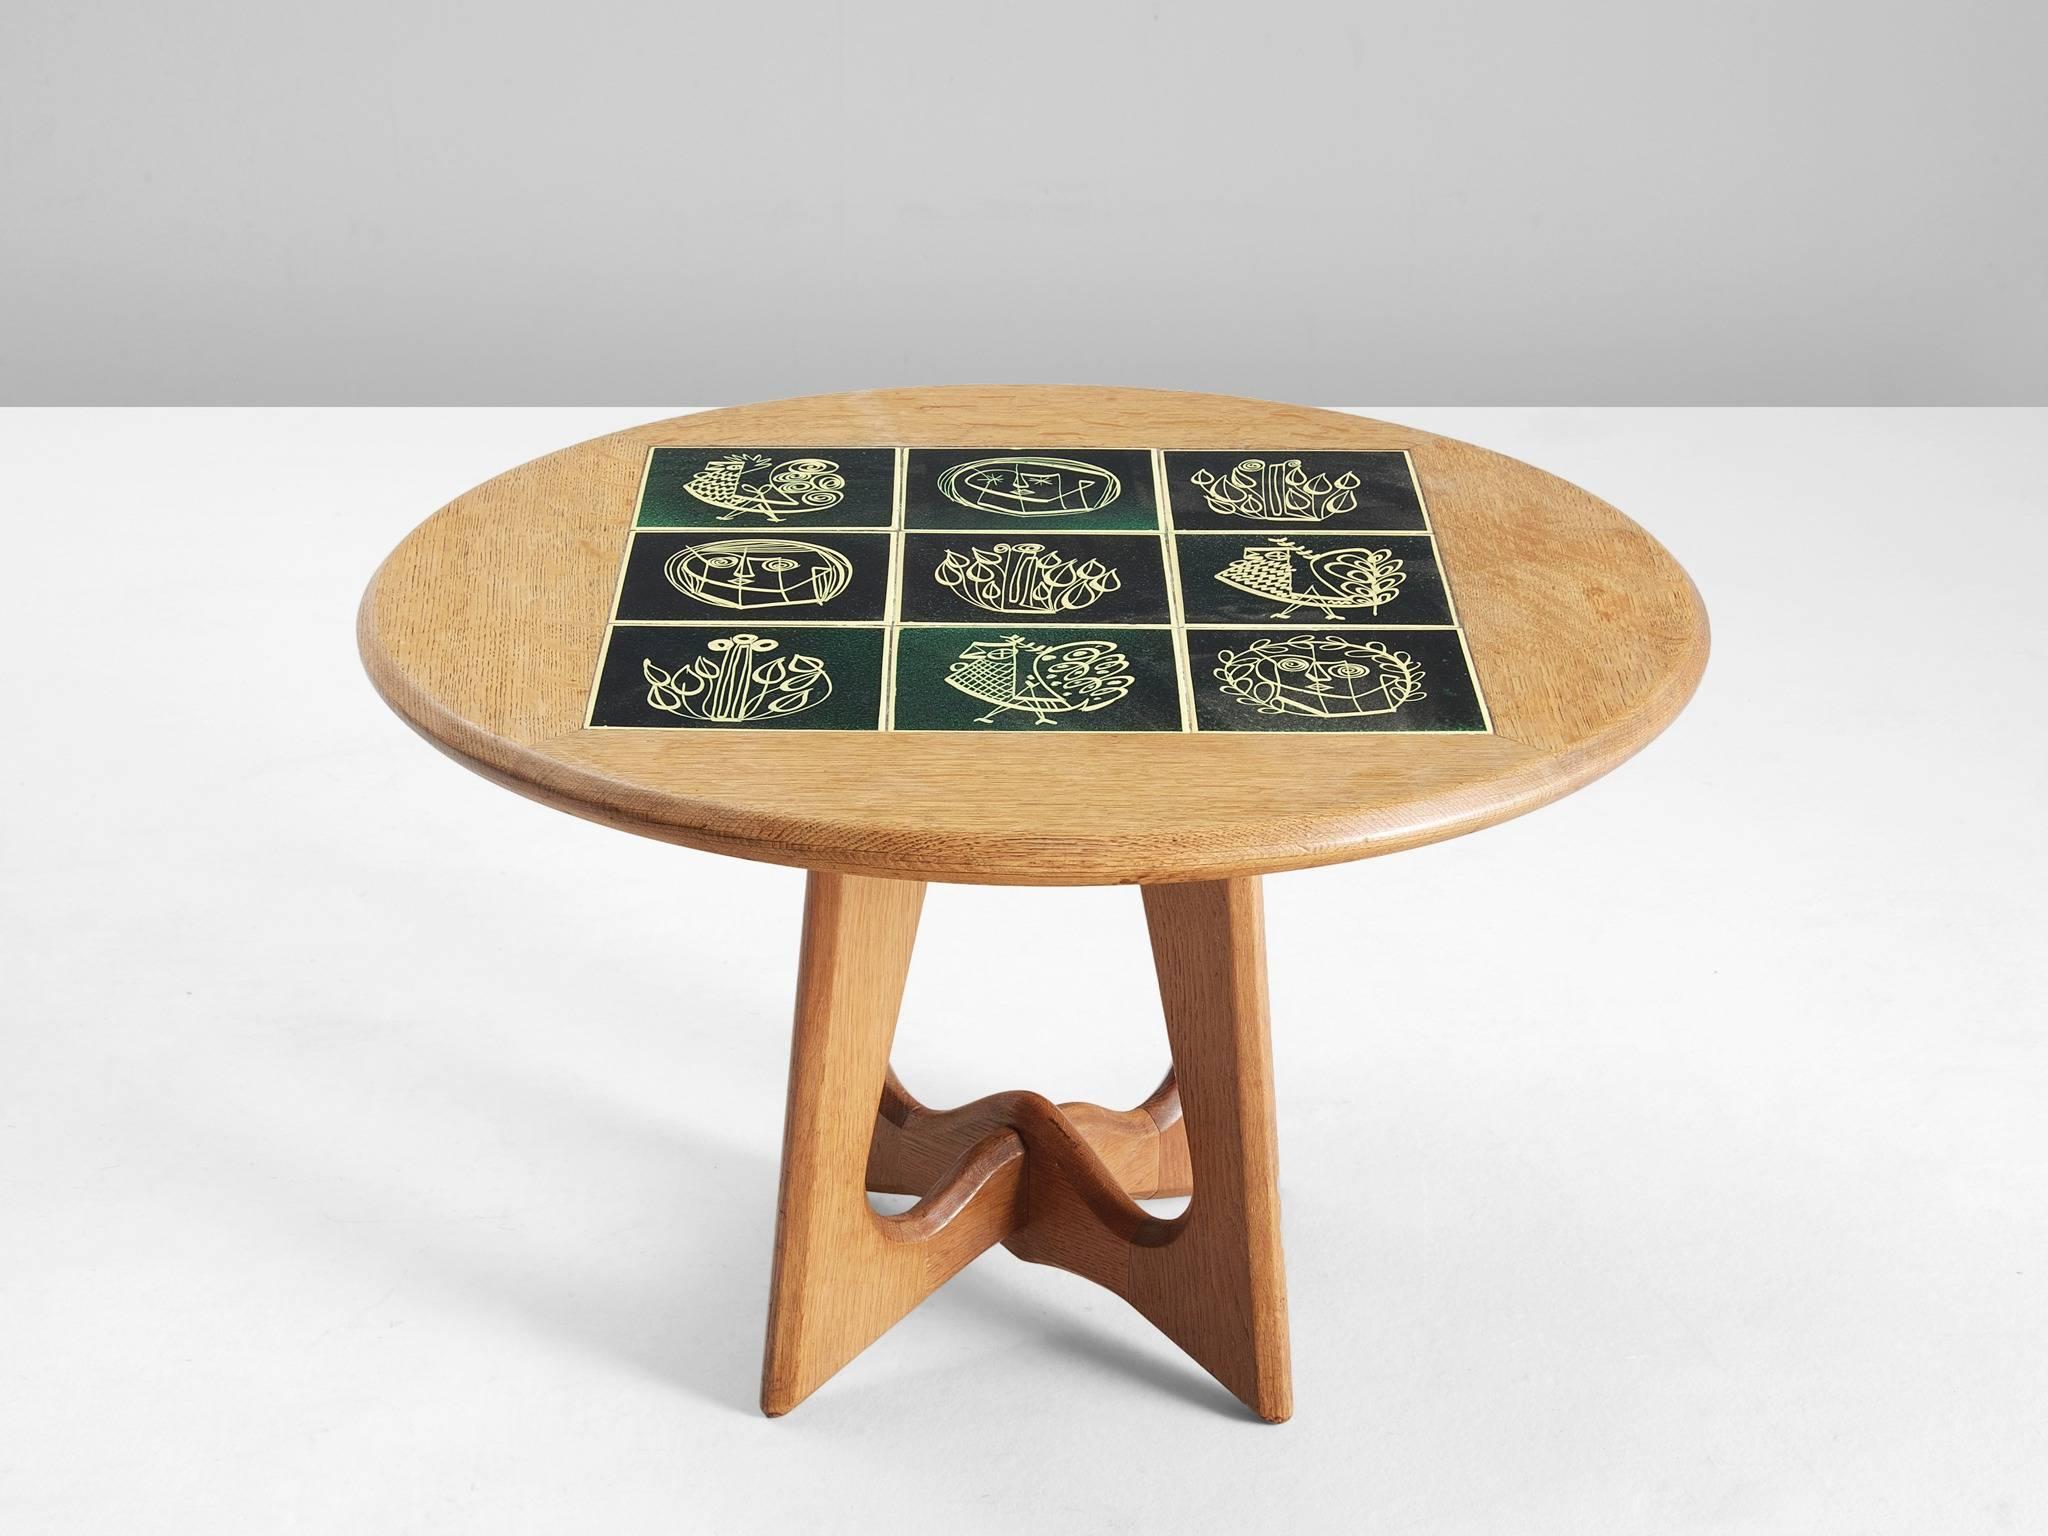 Coffee table, in oak and ceramic by Guillerme et Chambron, France 1960. 

Round oak coffee table with beautiful colored ceramic tiles in the top. The materials and forms of this table show the characteristics of the French designers Guillerme et